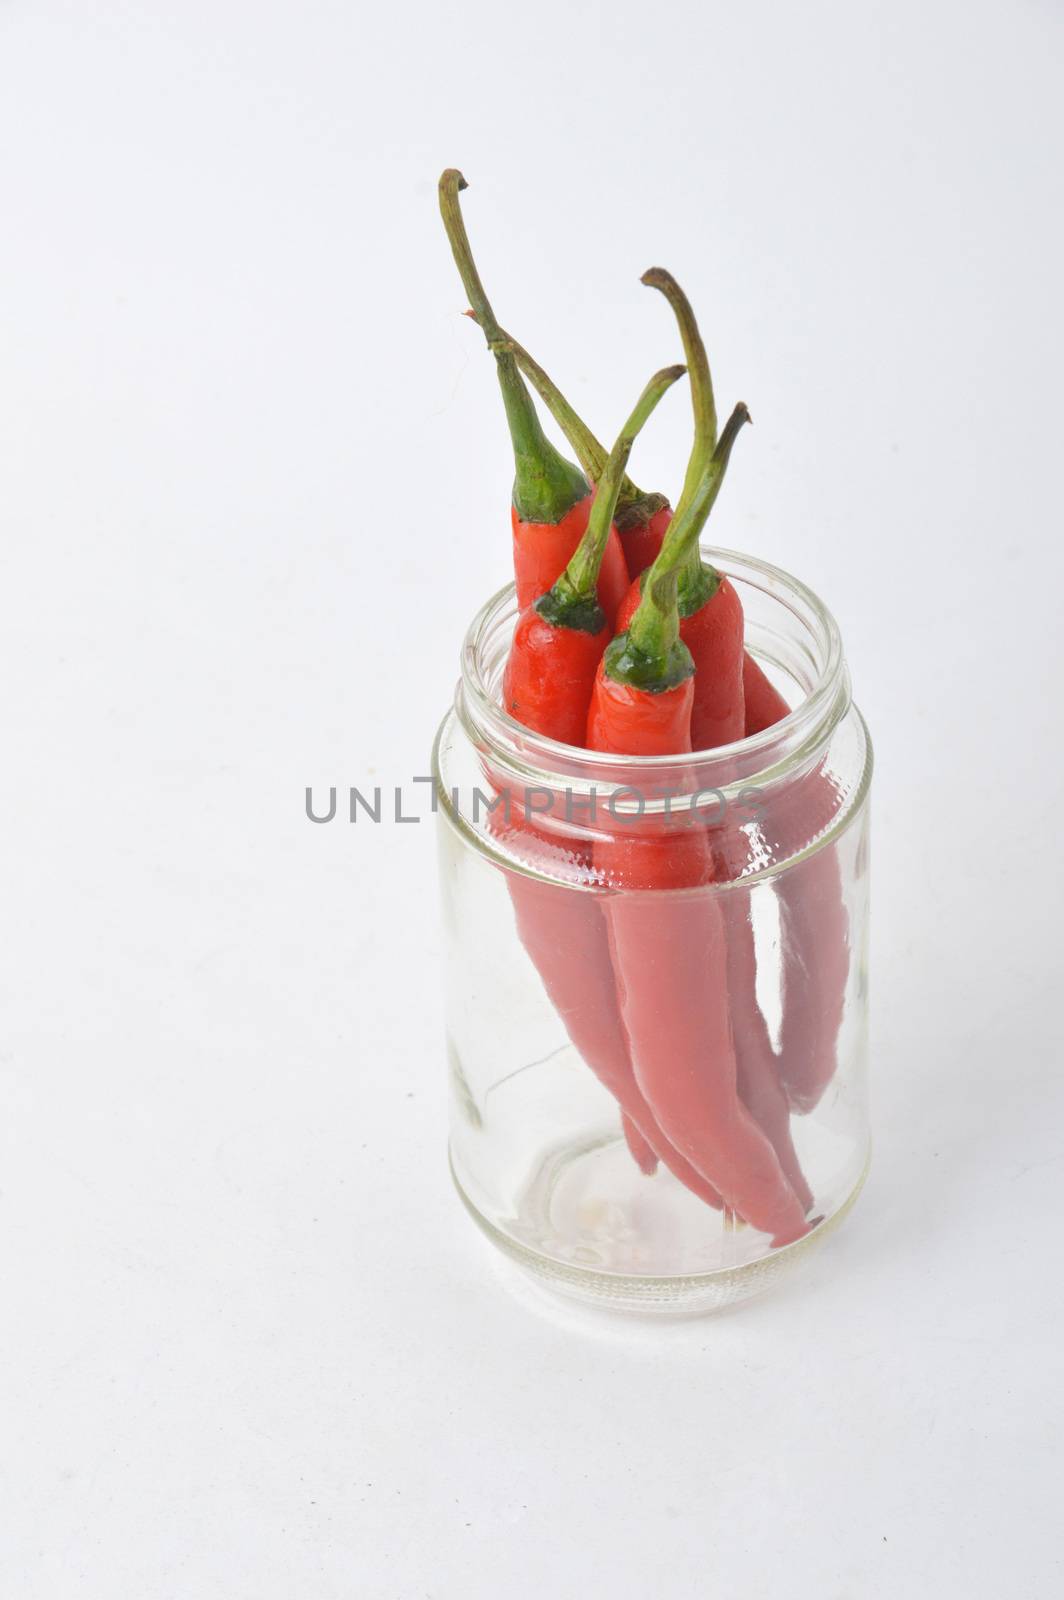 big chili red in a glass jar on white background